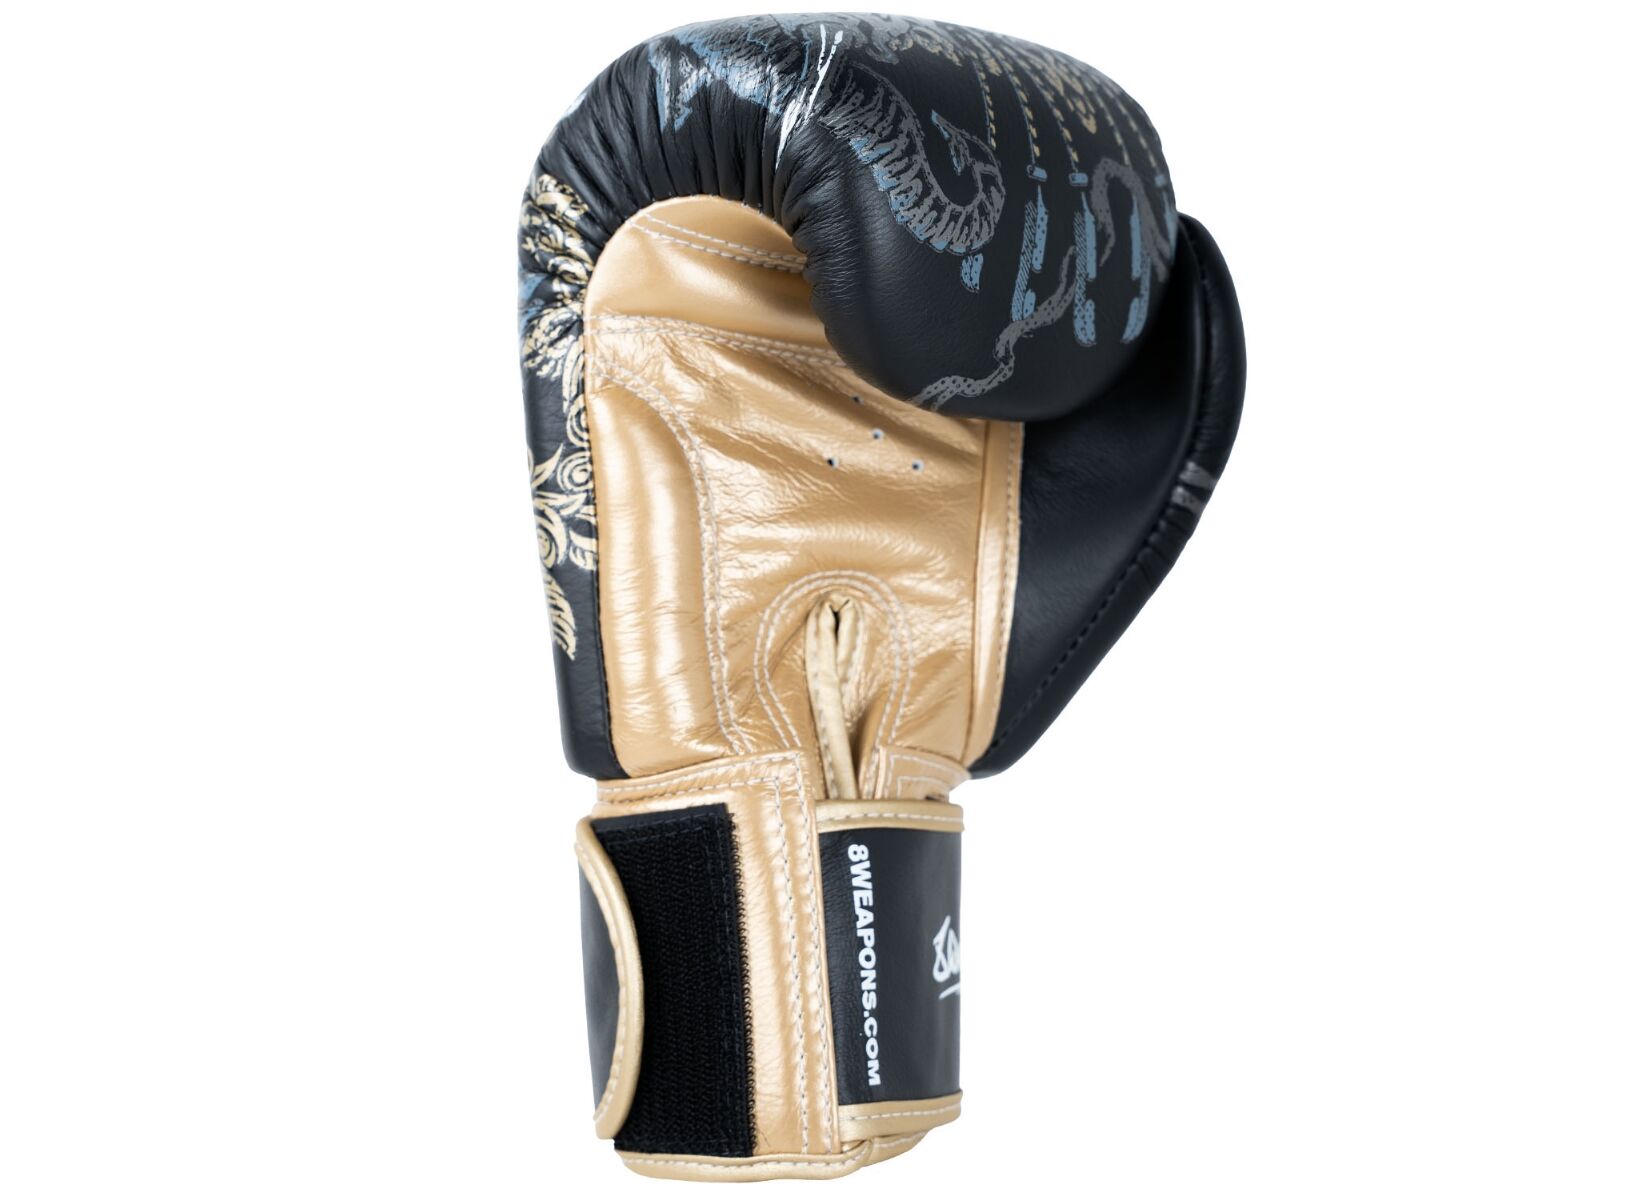 8 WEAPONS Boxing Gloves, Three Elephants 2.0, black-gold, 10 Oz